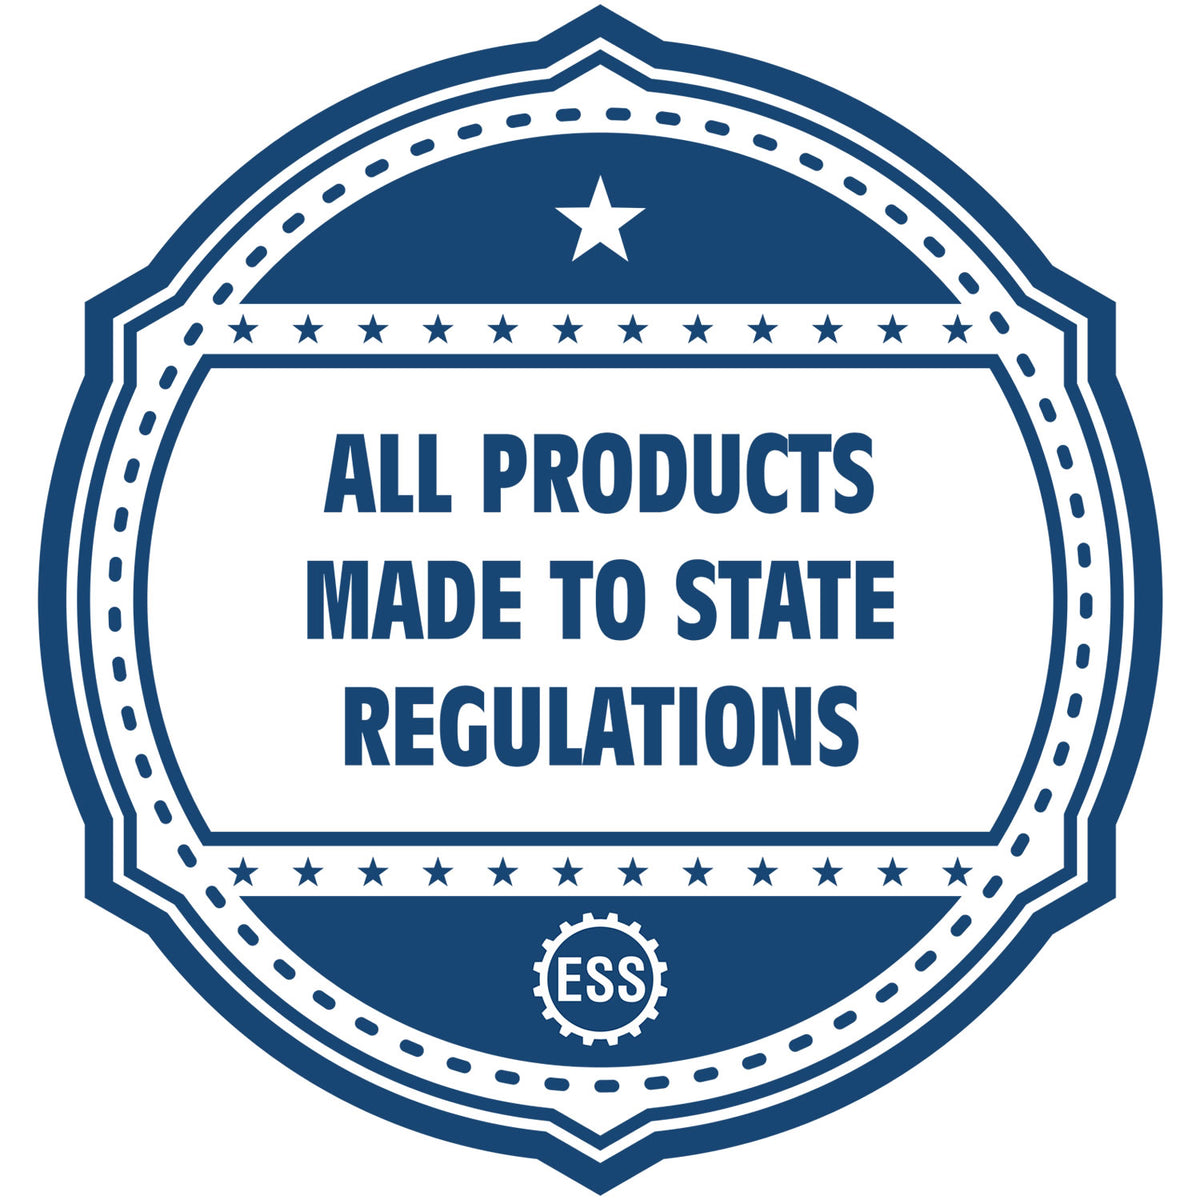 An icon or badge element for the Slim Pre-Inked Alaska Architect Seal Stamp showing that this product is made in compliance with state regulations.